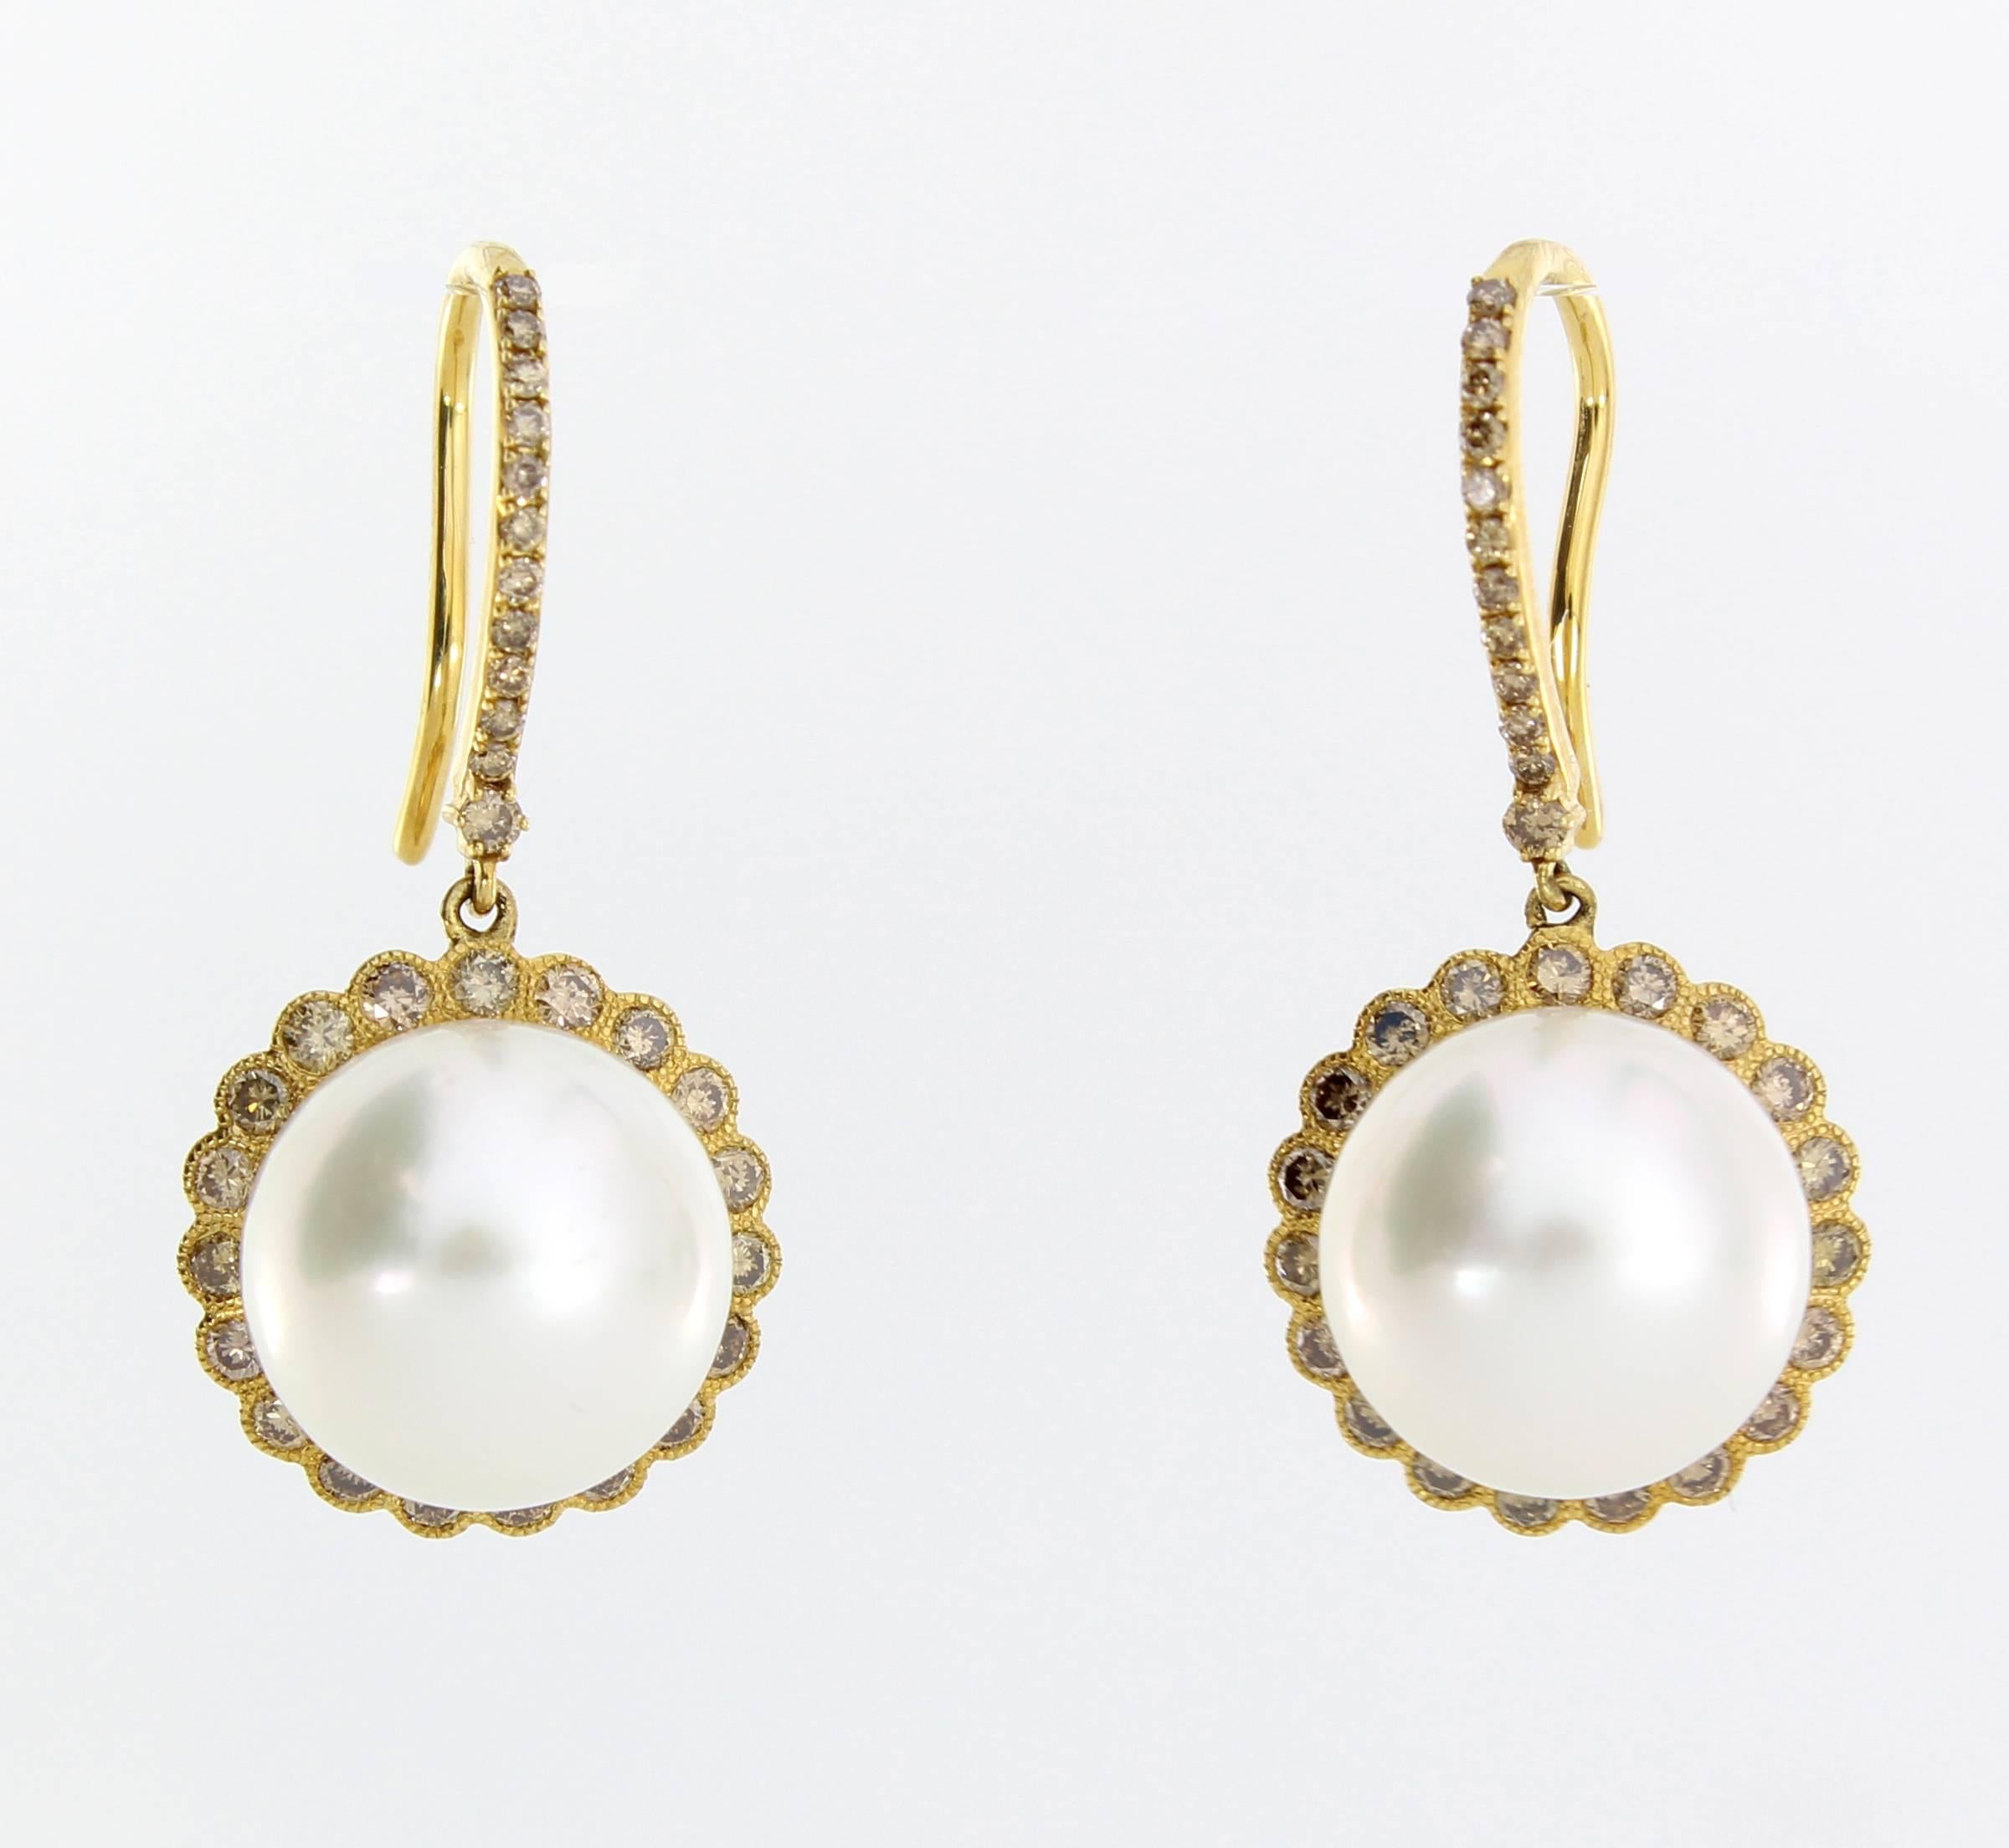 The Sphere Earrings are from the AUTORE Timeless Collection. 
This piece is crafted in 18k Yellow Gold with Brown Diamonds (1.16ct) and 12mm White High Button South Sea Pearls. 